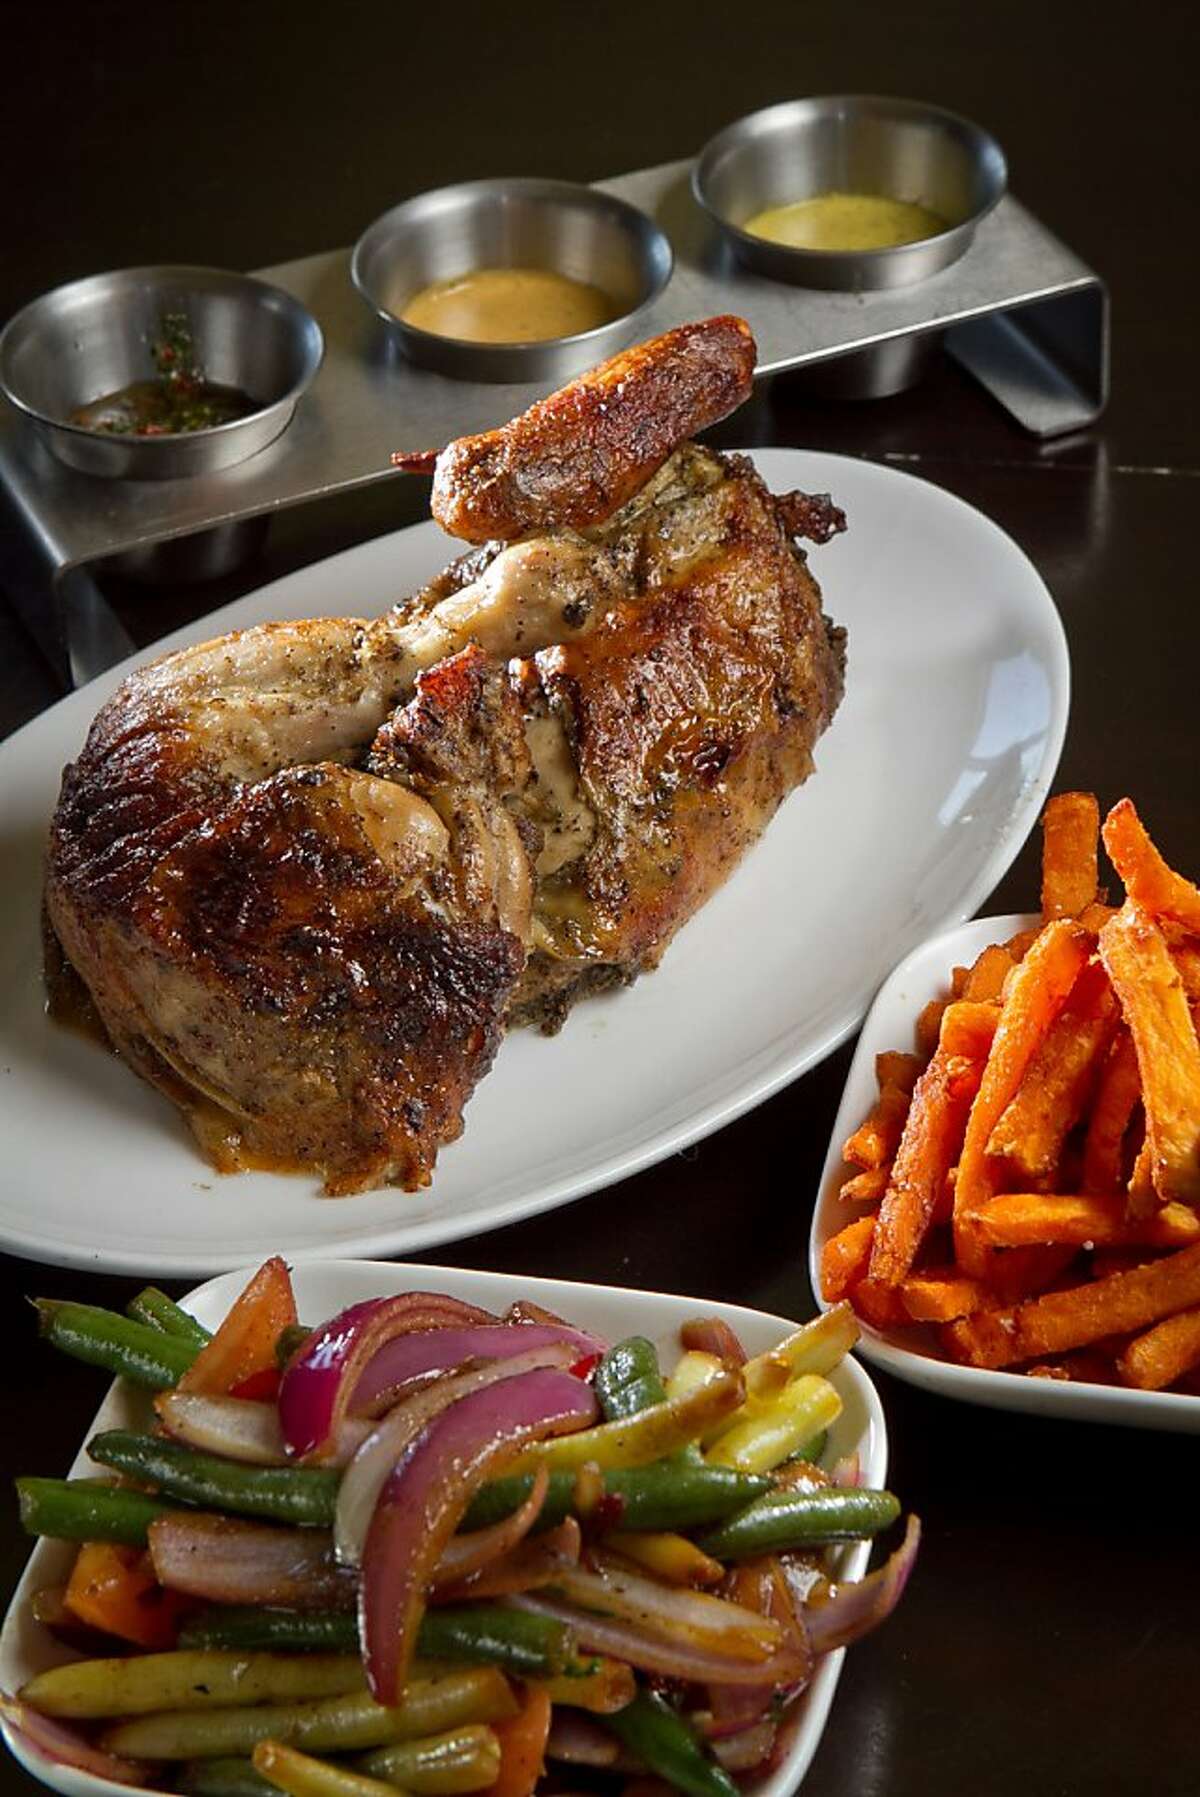 The Half Chicken with sides of Veggies and Sweet Potato Fries at Limon Rotisserie in San Francisco, Calif., is seen on Thursday, October 18th, 2012.